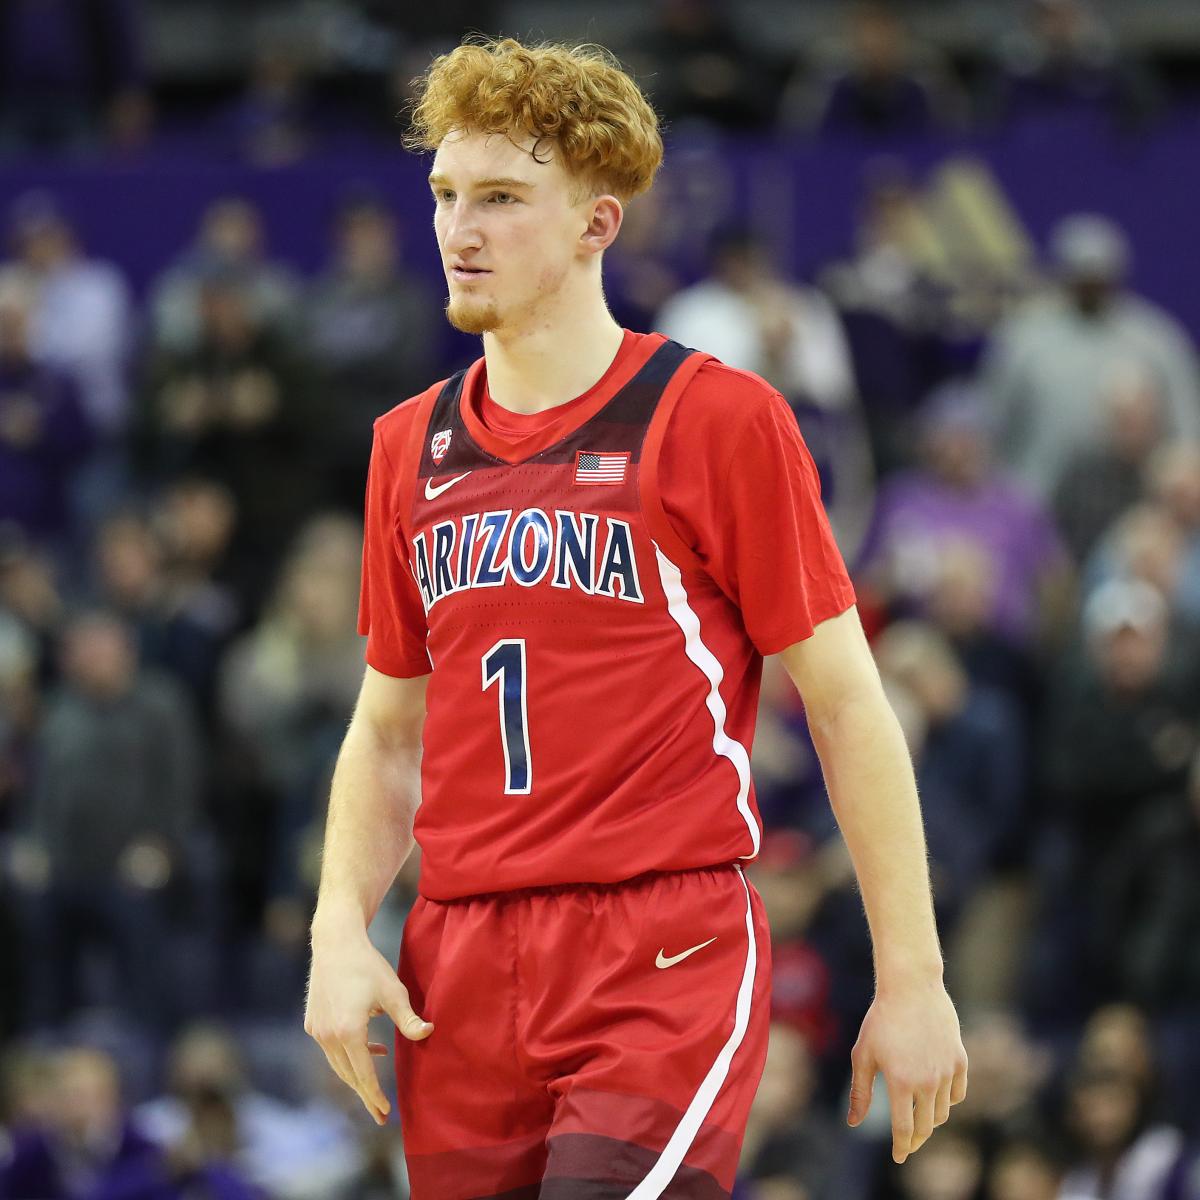 Nico Mannion's Father Pace Denies Son Will Leave Arizona, Enter 2020